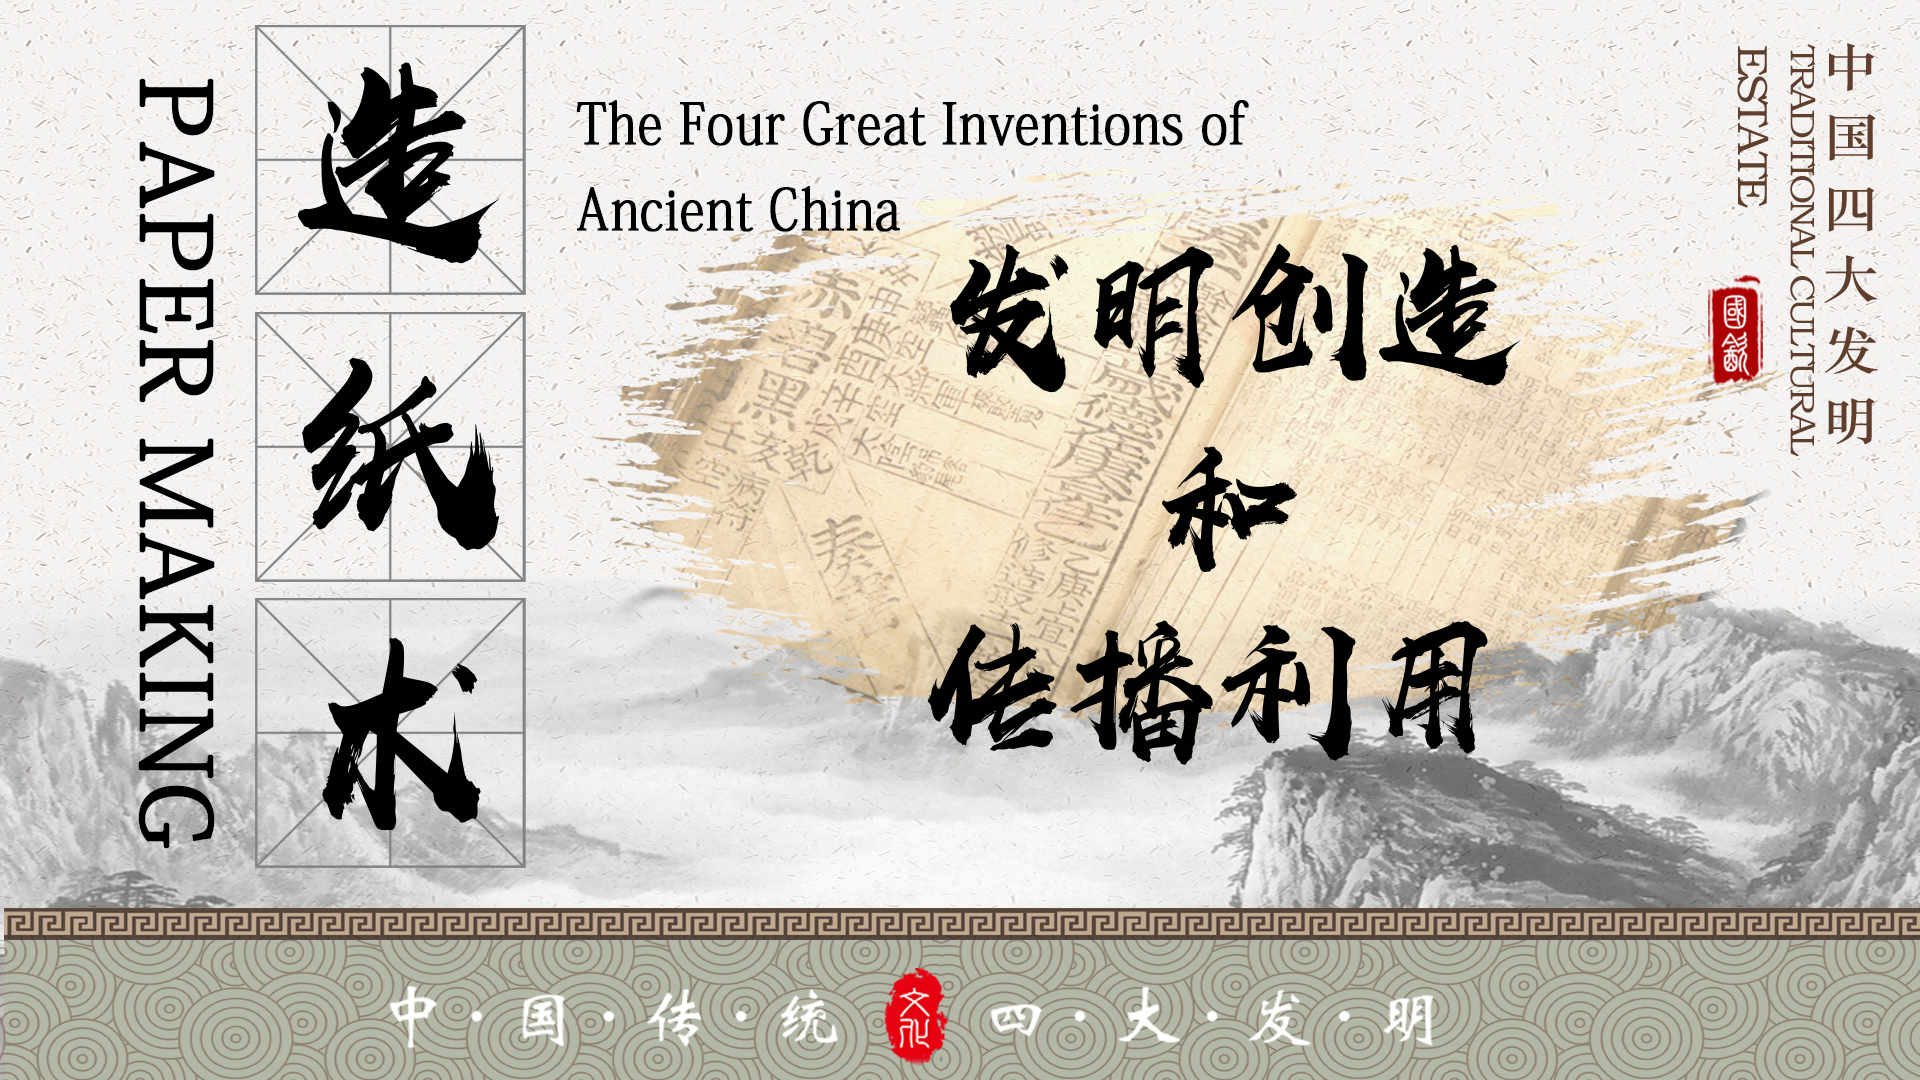 The second of the Four Great Inventions of Ancient China: Paper Making